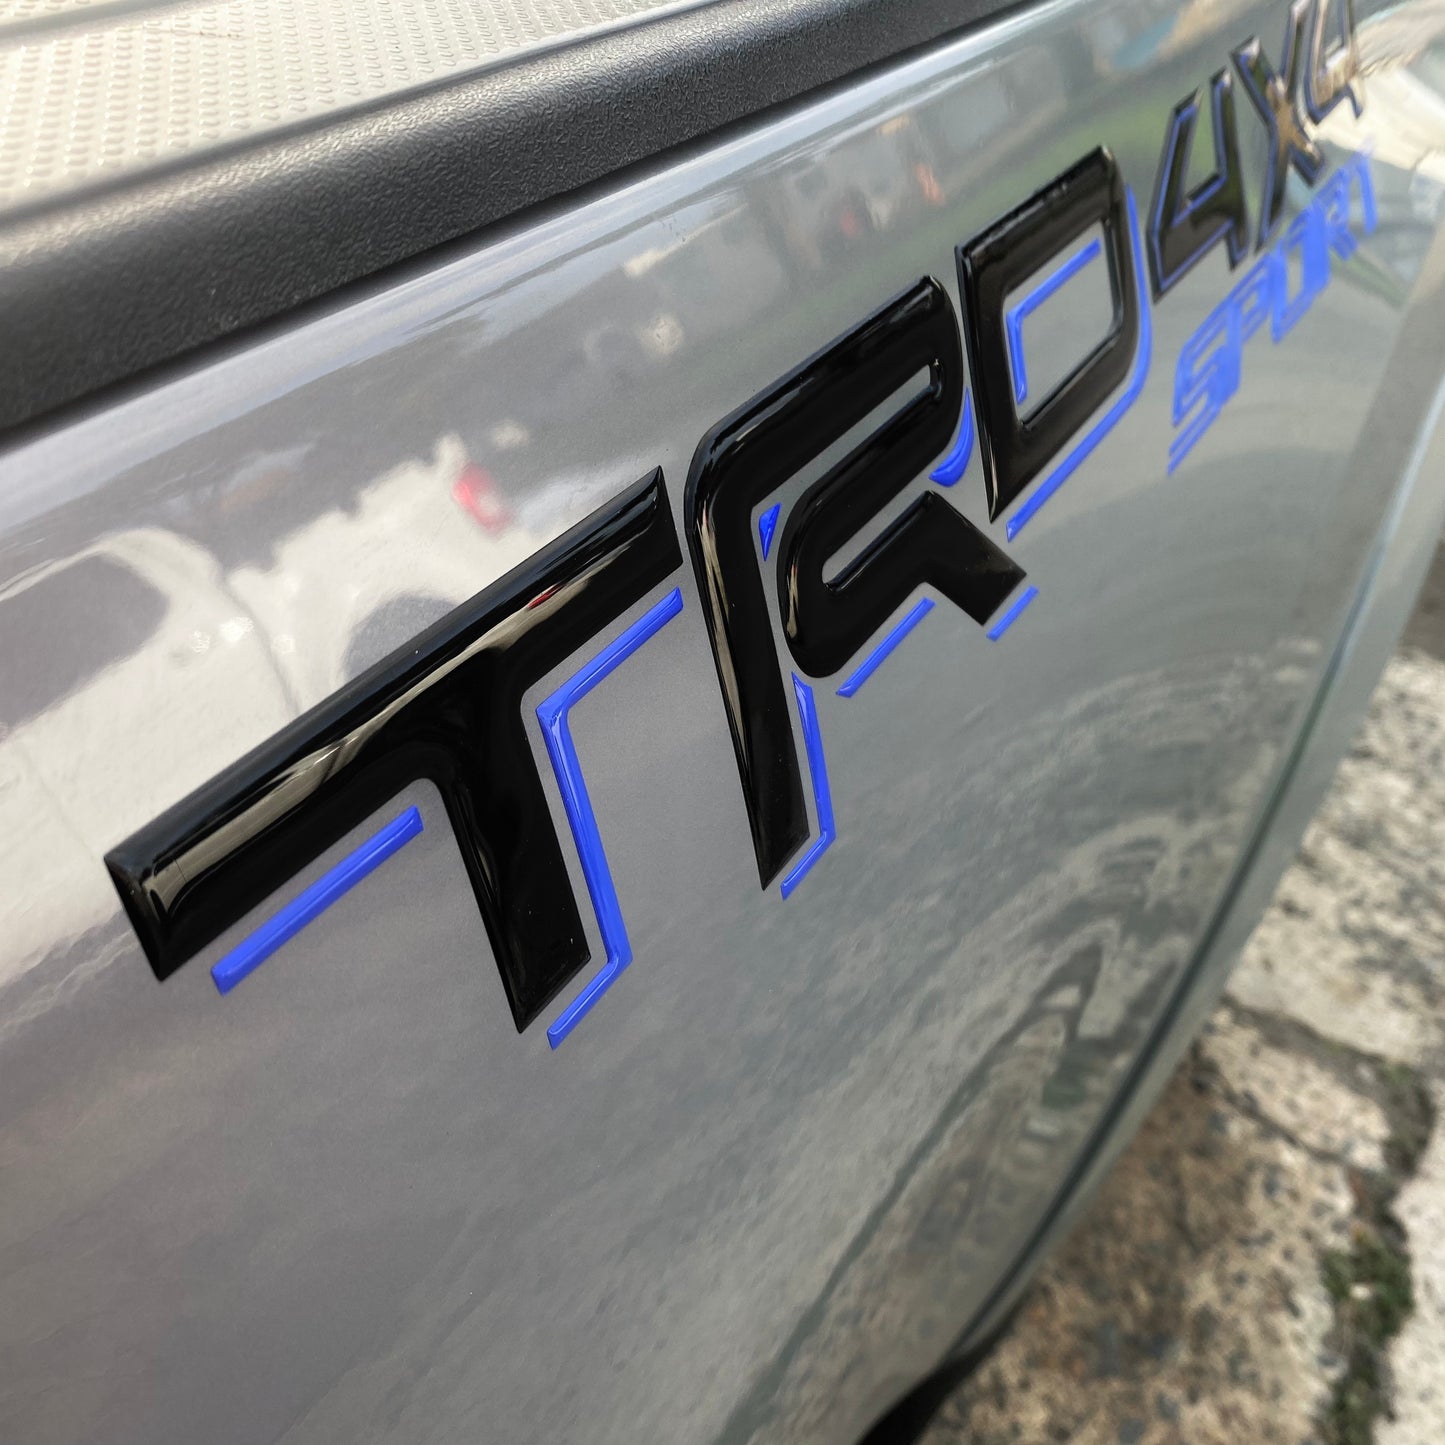 TRD 4X4 SPORT and TRD 4X4 OFF ROAD for TACOMA 2016-2022 Side Gel Sticker